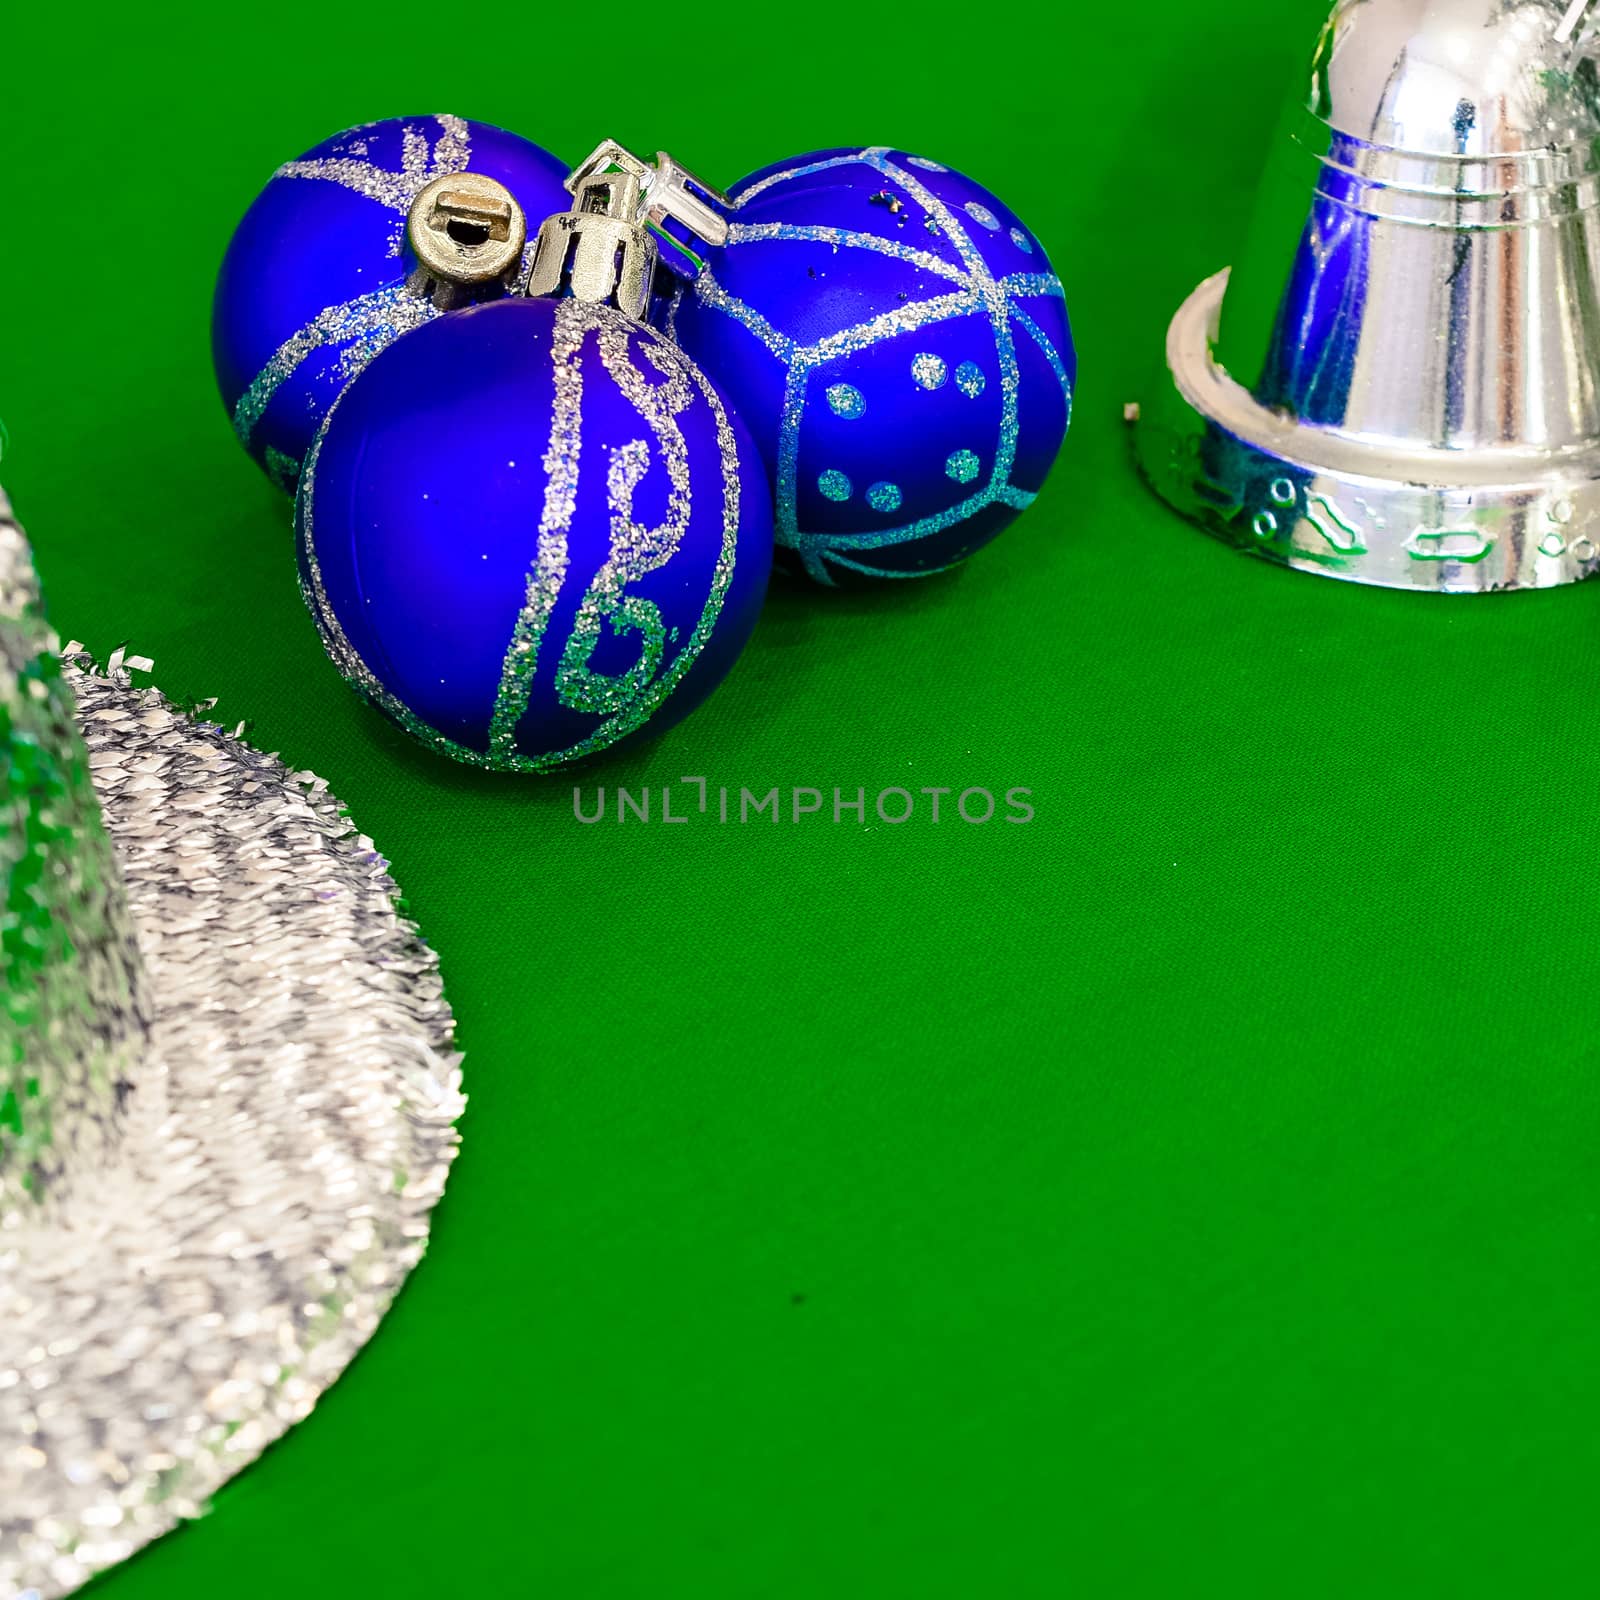 Christmas decoration silver or gold on green tablecloth or cloth by alexandr_sorokin